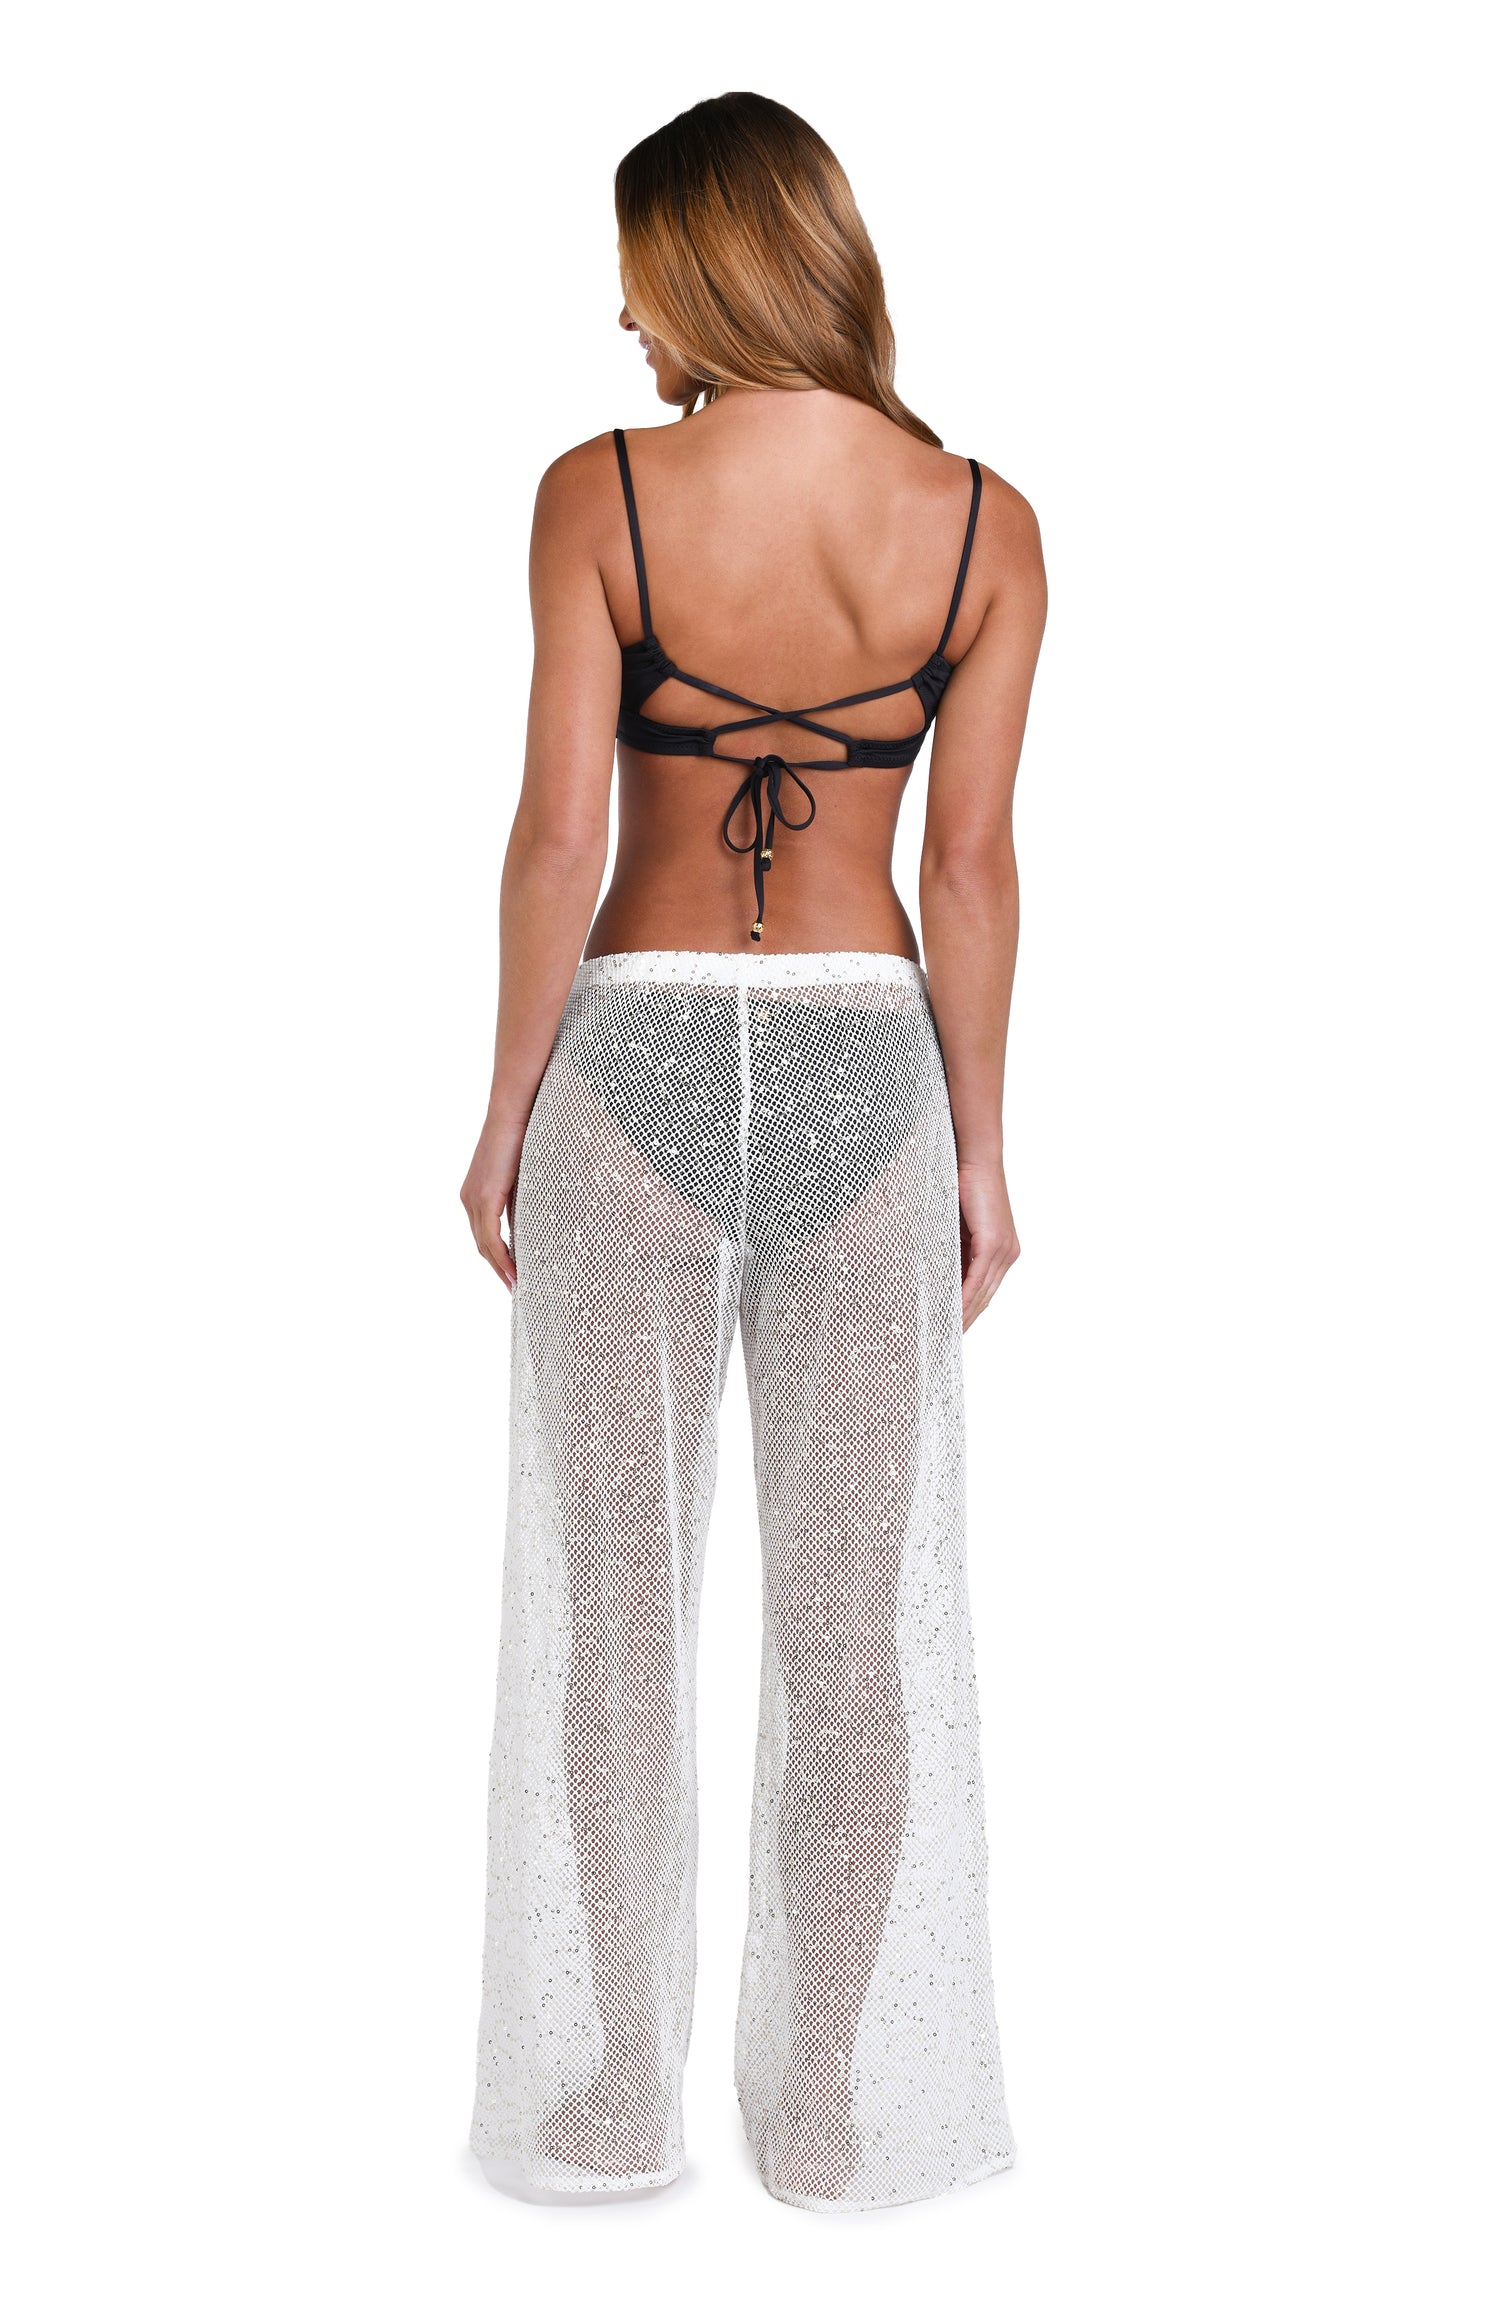 Model is wearing a white colored sheer beach pant cover up.